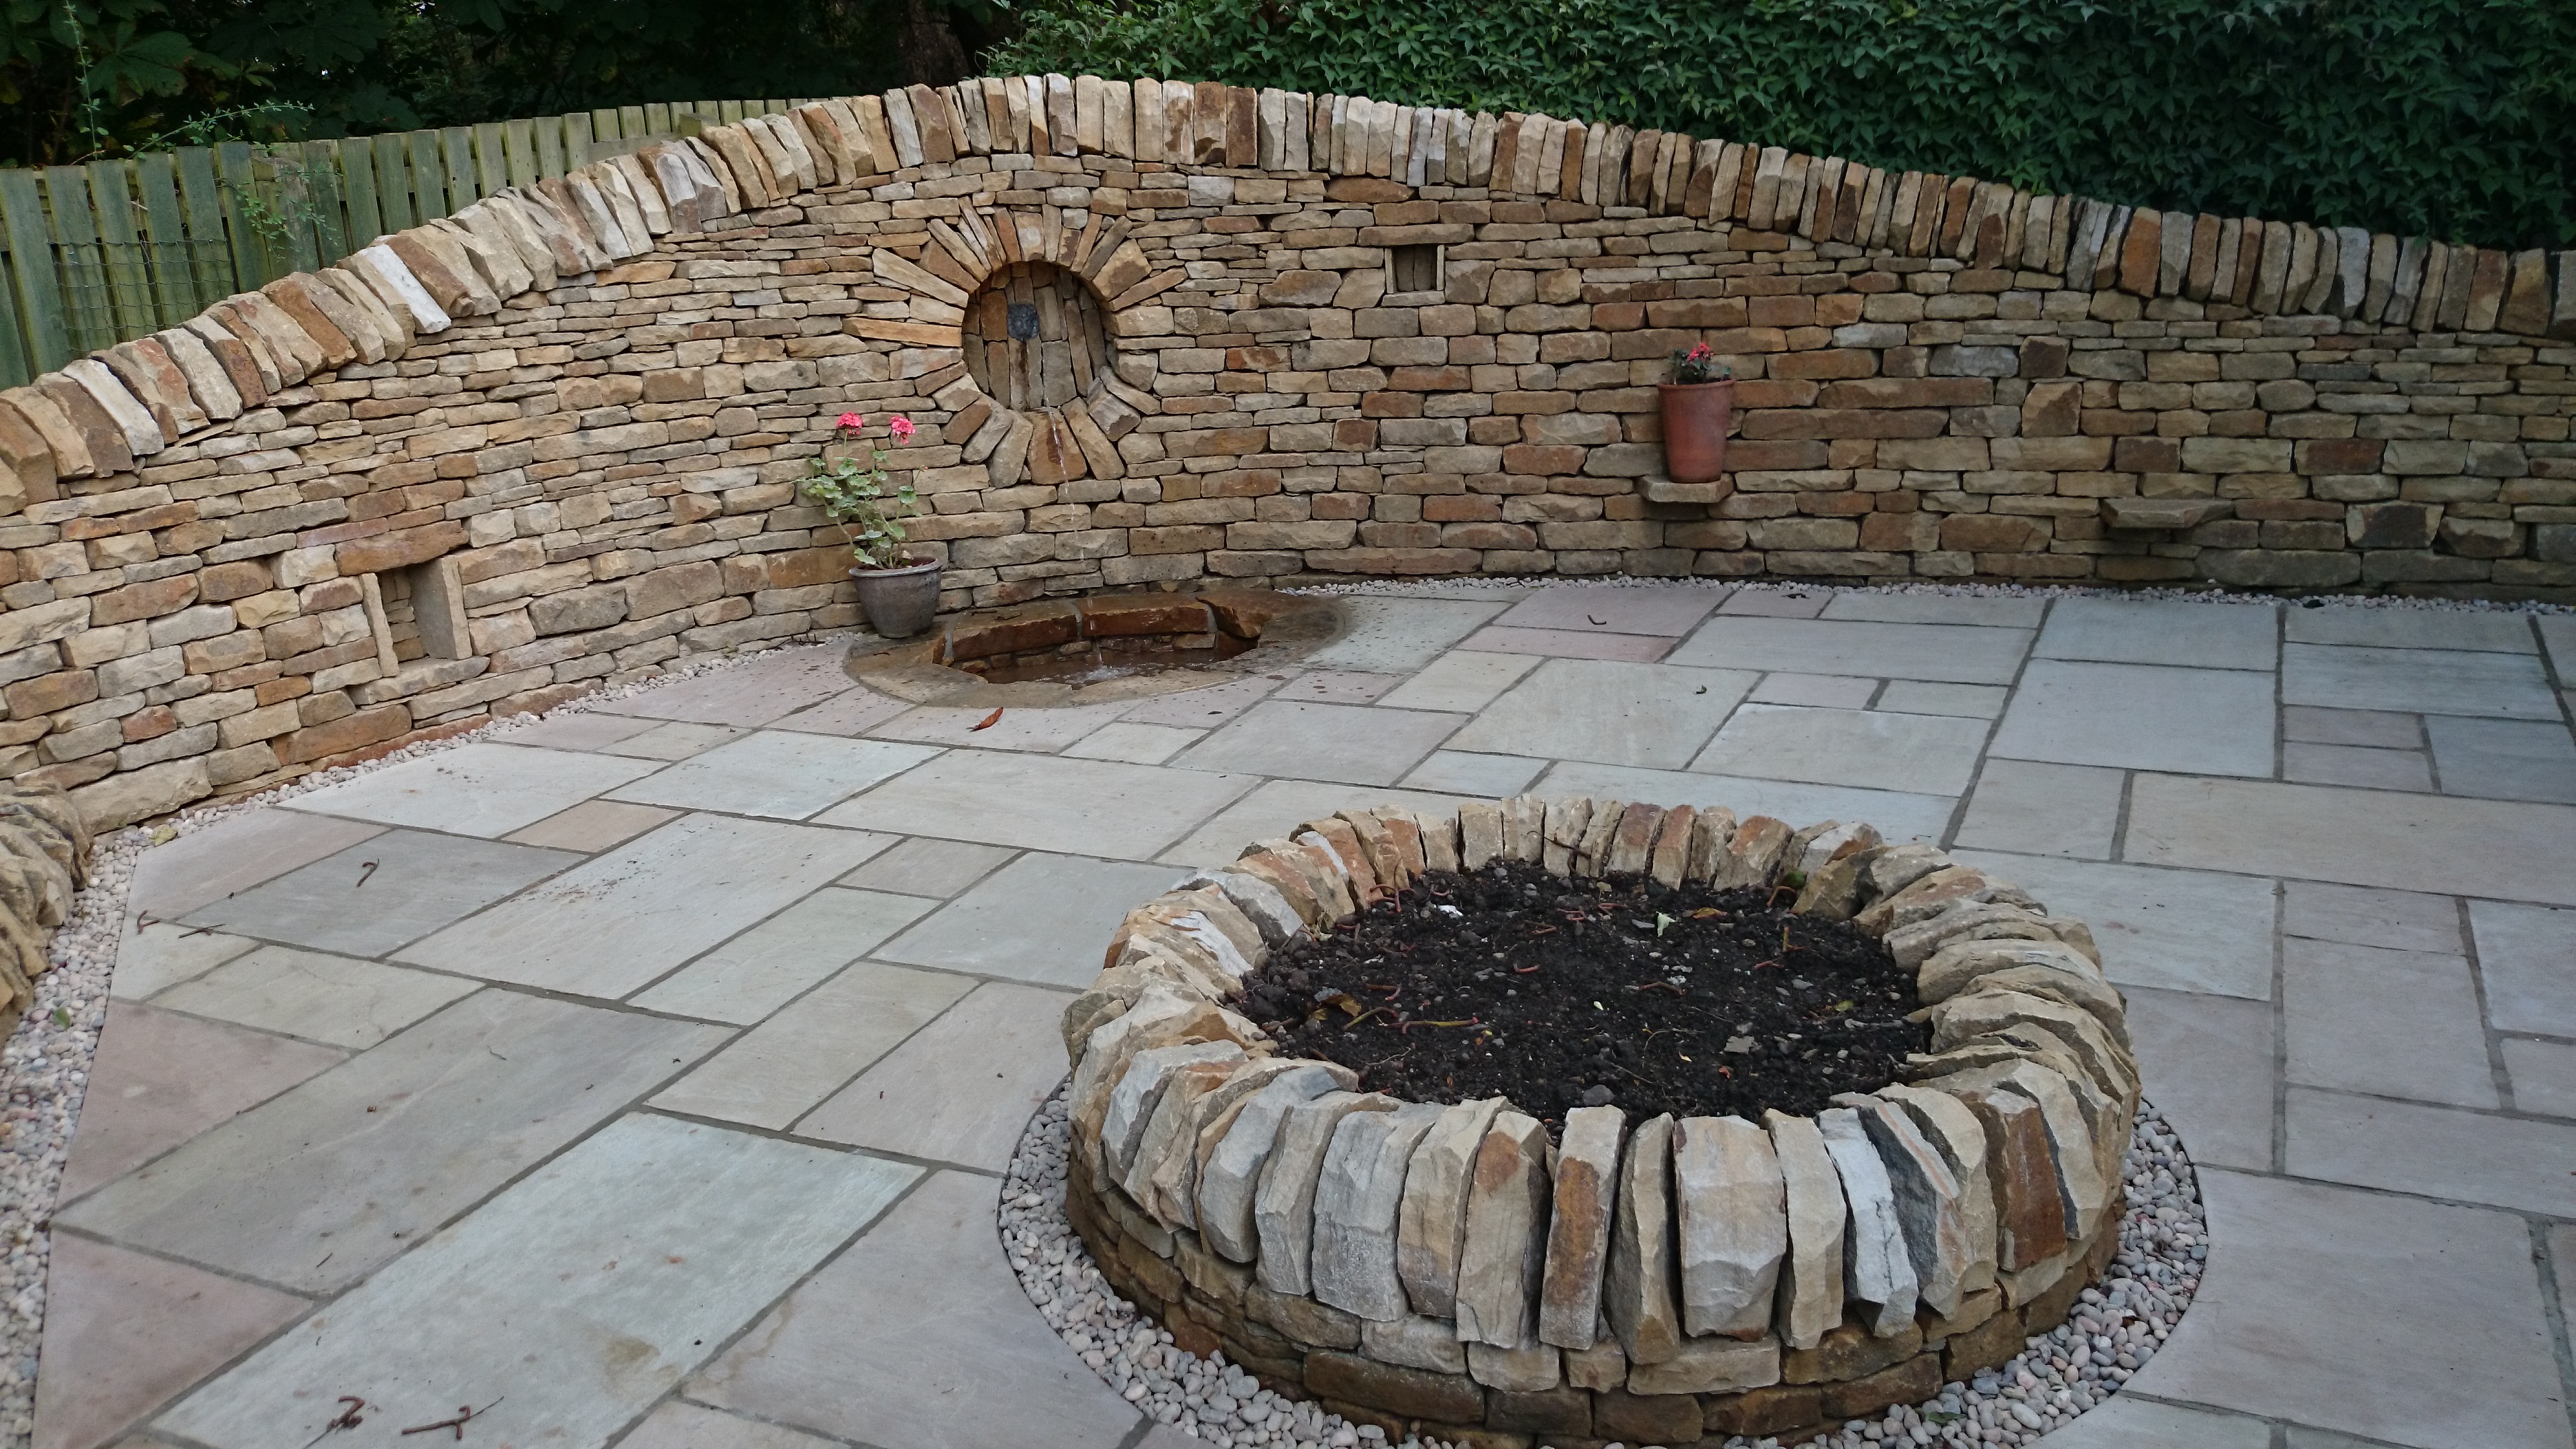 Dry stone wall and garden